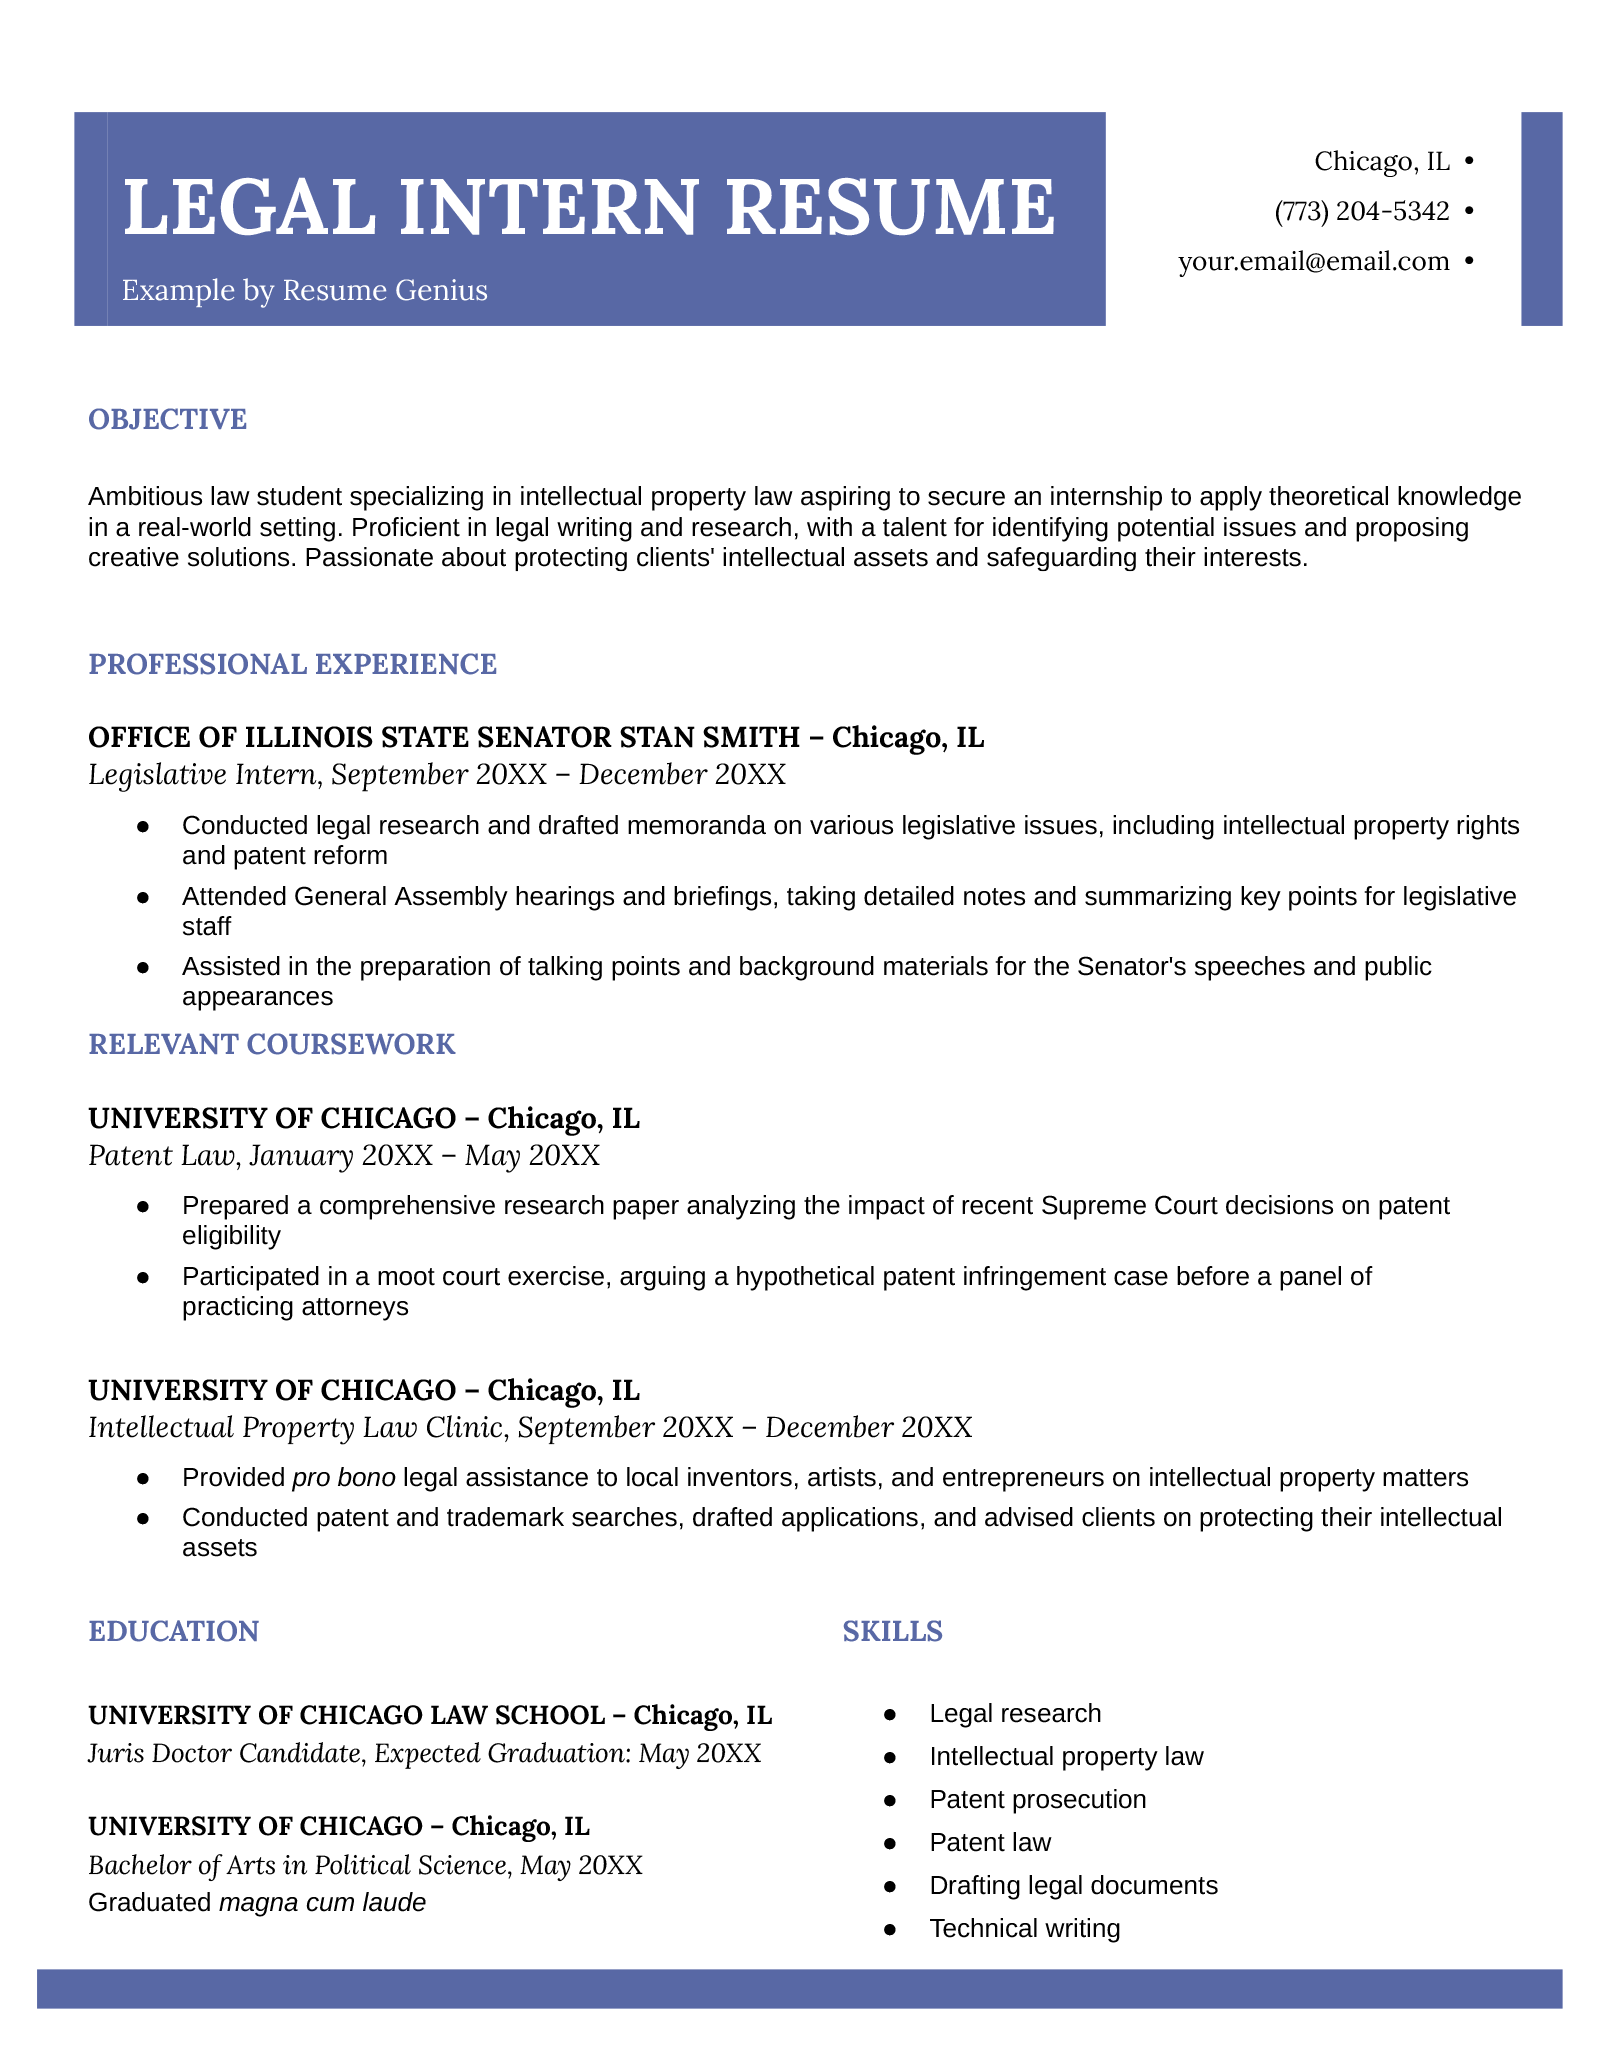 An example resume for a legal intern.